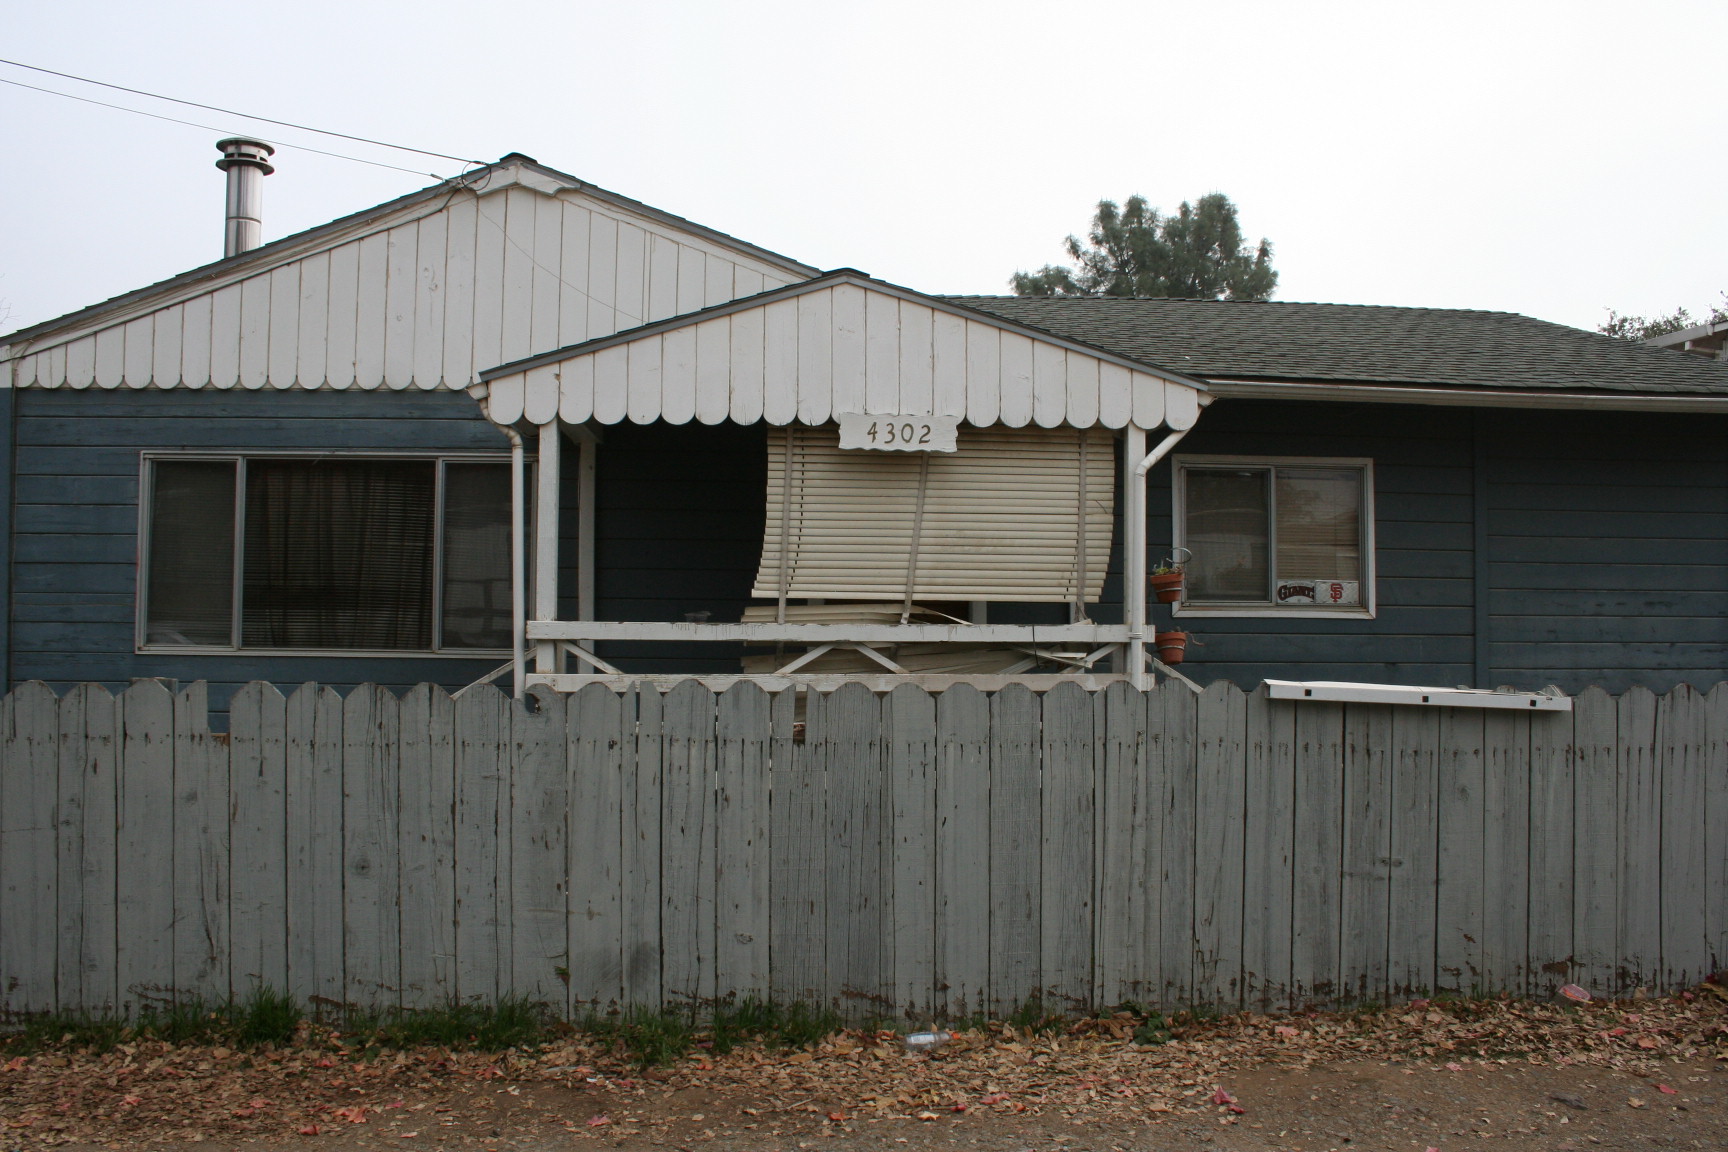  4302 Lasky Ave, Clearlake, CA photo